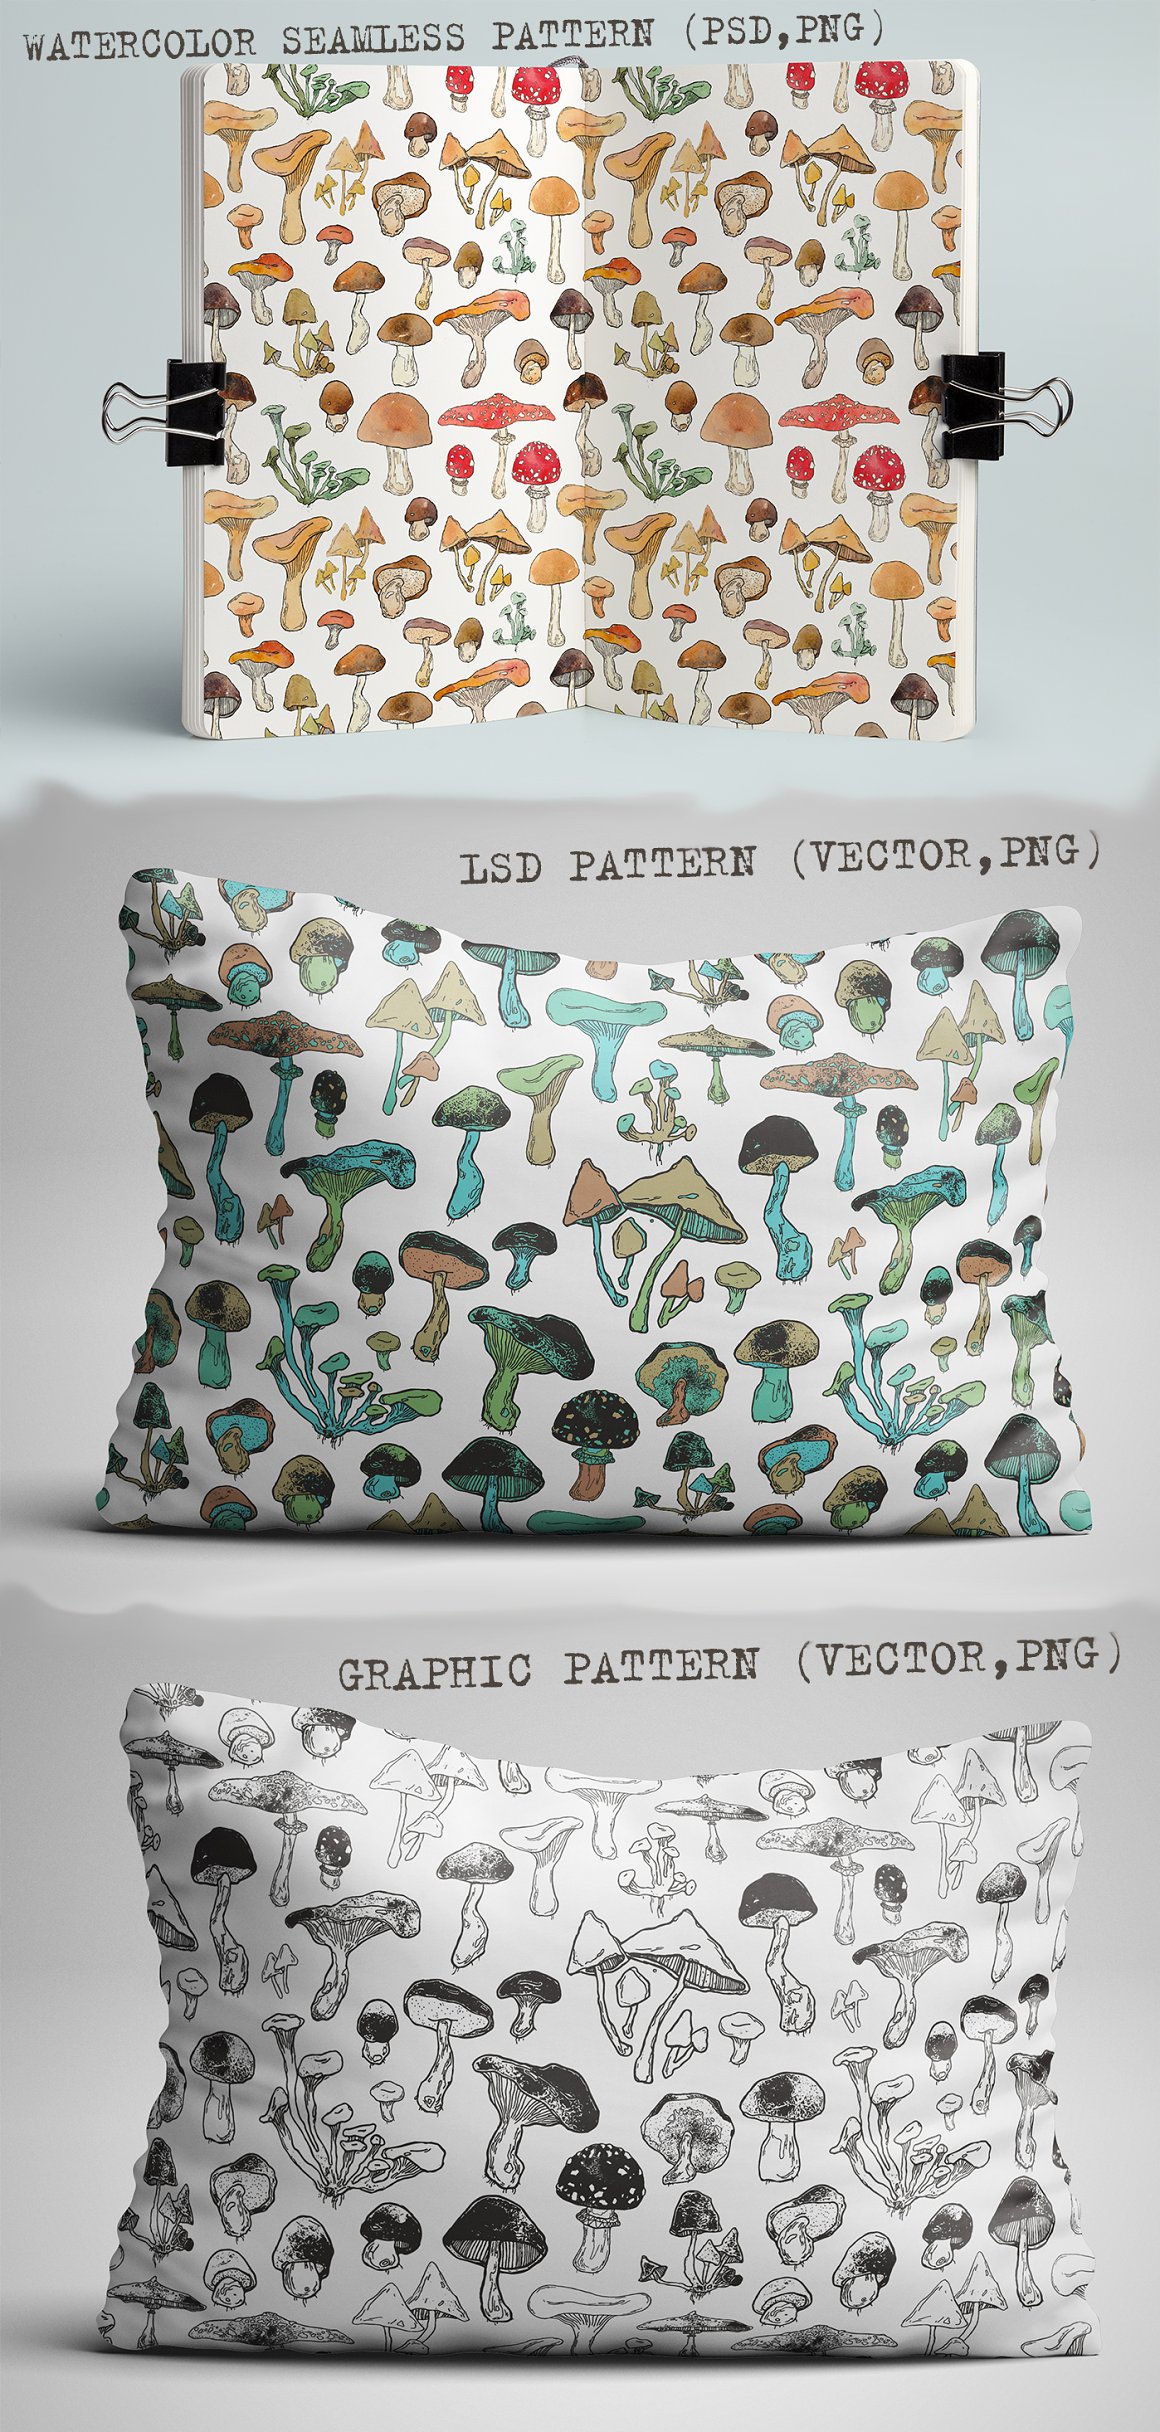 Image of a pillow with mushrooms.